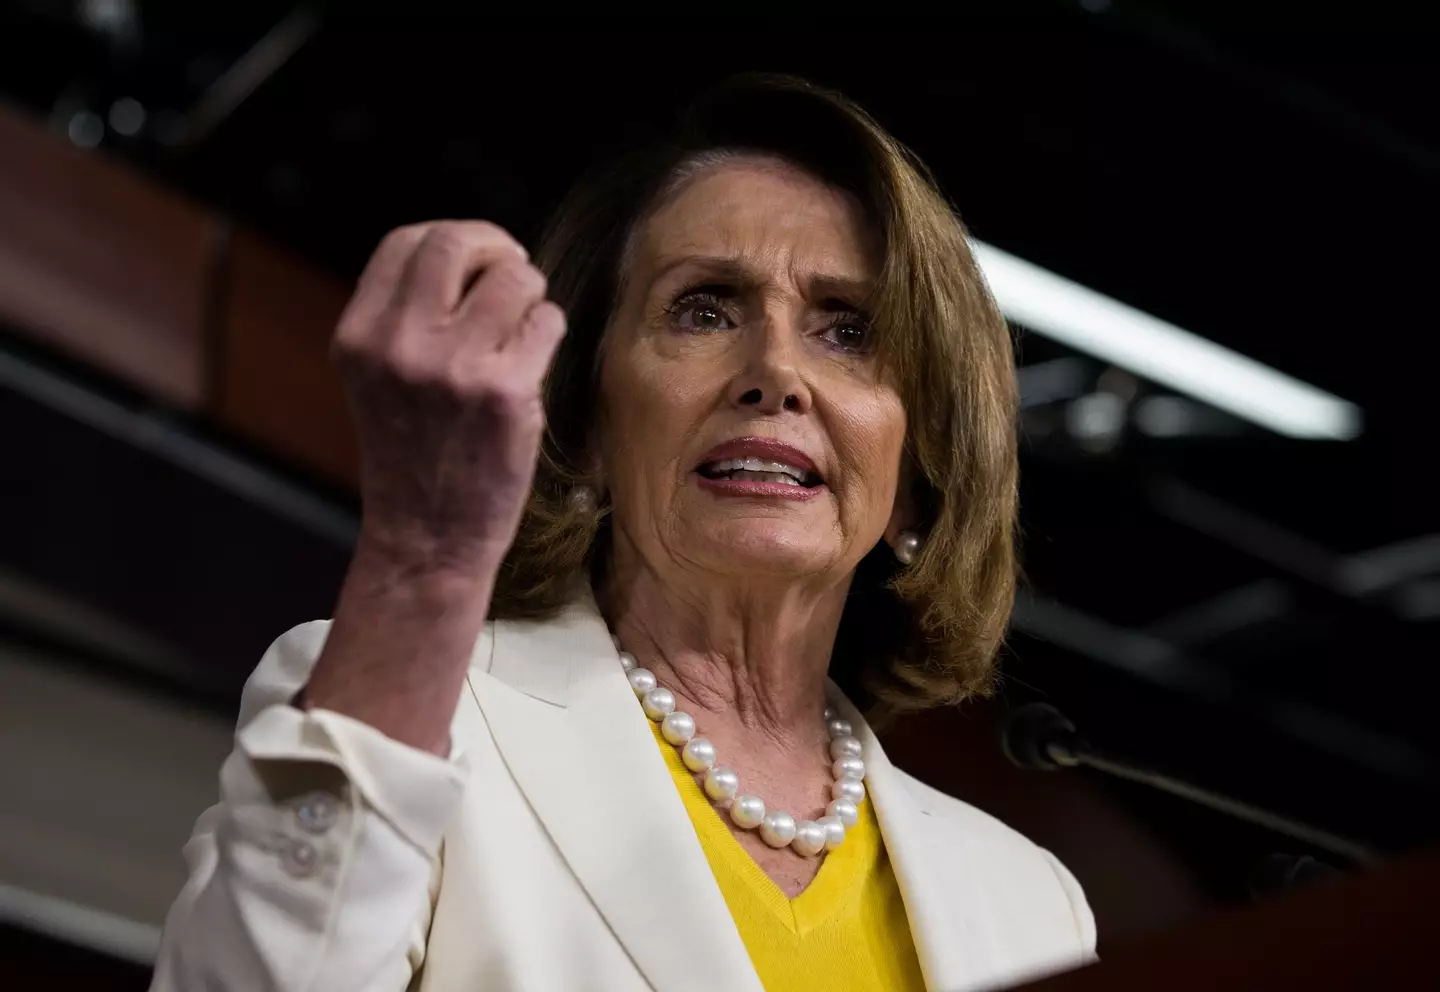 Nancy Pelosi has confirmed a ban on assault weapons will be considered.